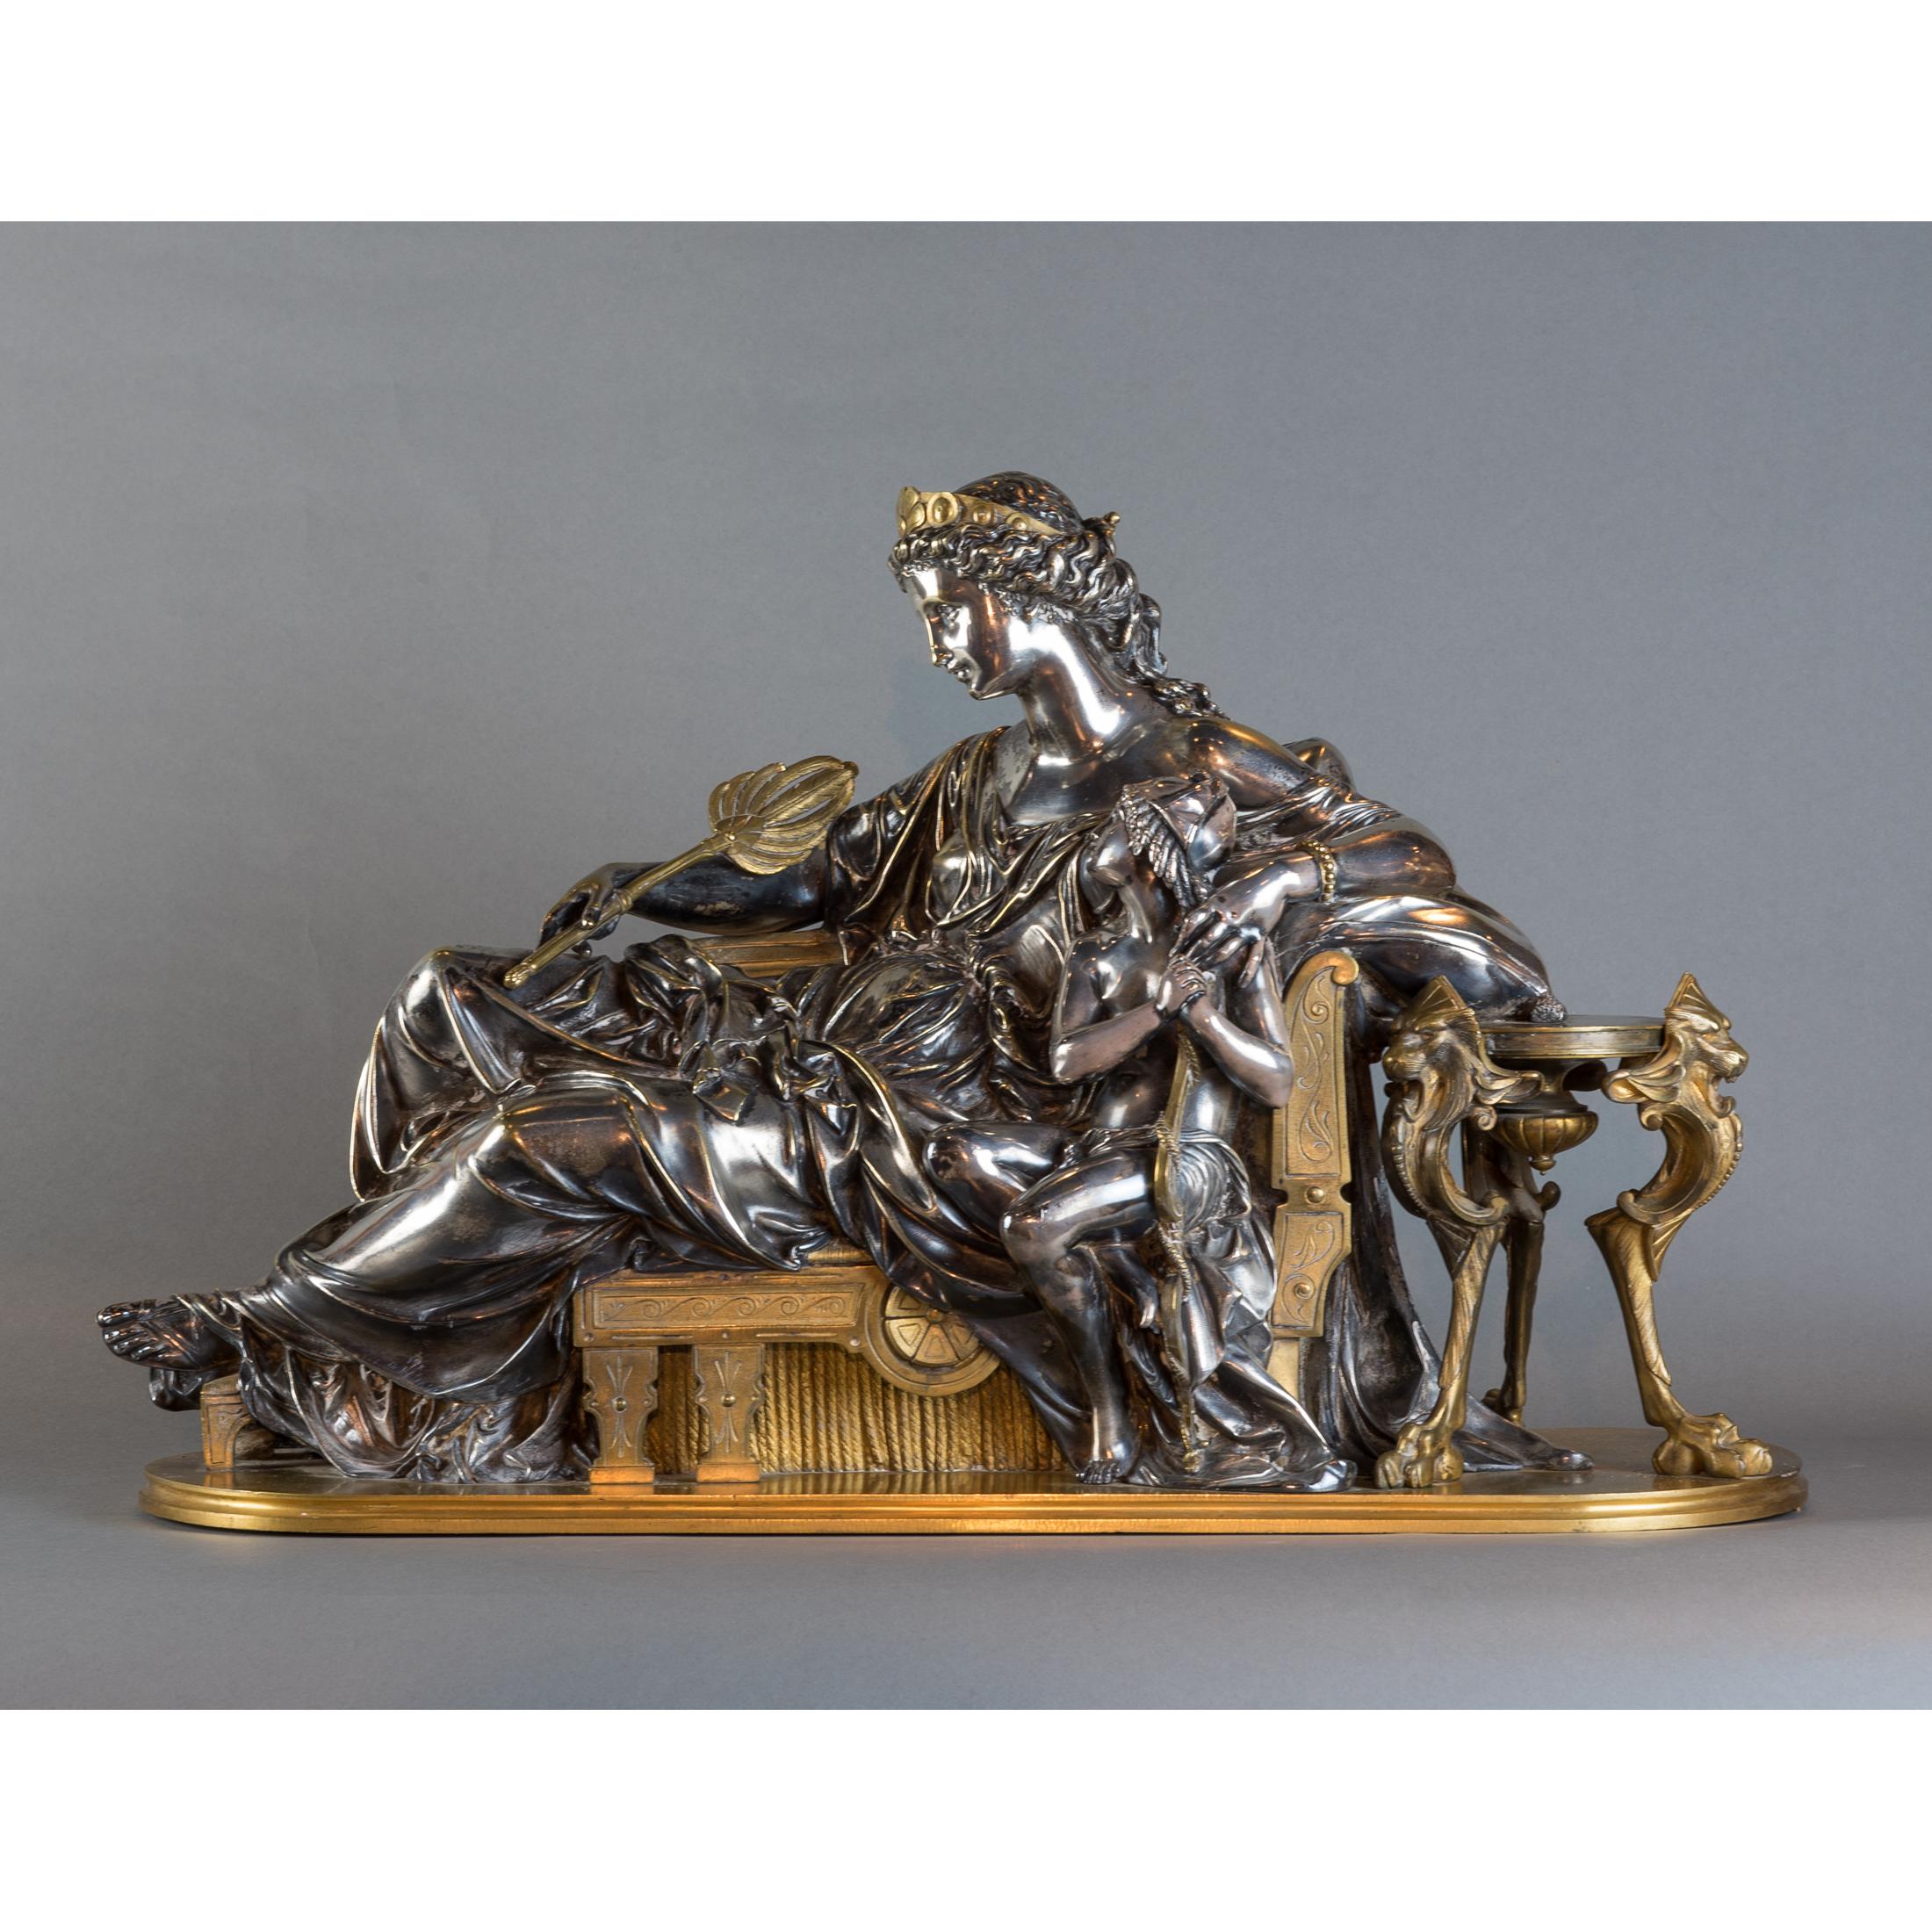 Fine French neoclassical silvered sculpture bronze of young lady and child on a recamier

Exquisite cast bronze sculpture of reclining woman and child with silver highlights on figures and robes. Furnishings and base in dore gilt att. Jean